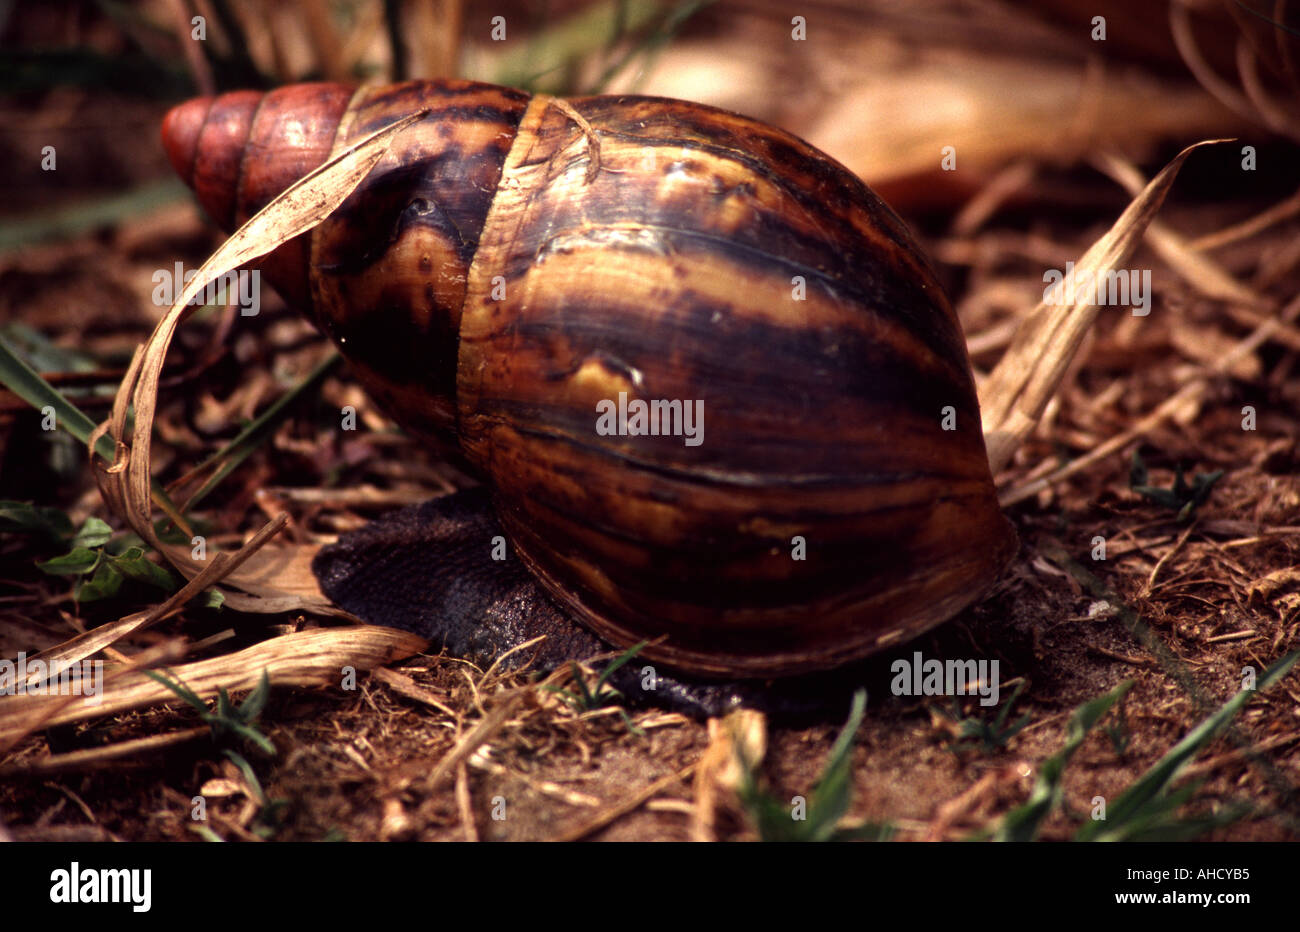 African Giant land snail, Stock Photo